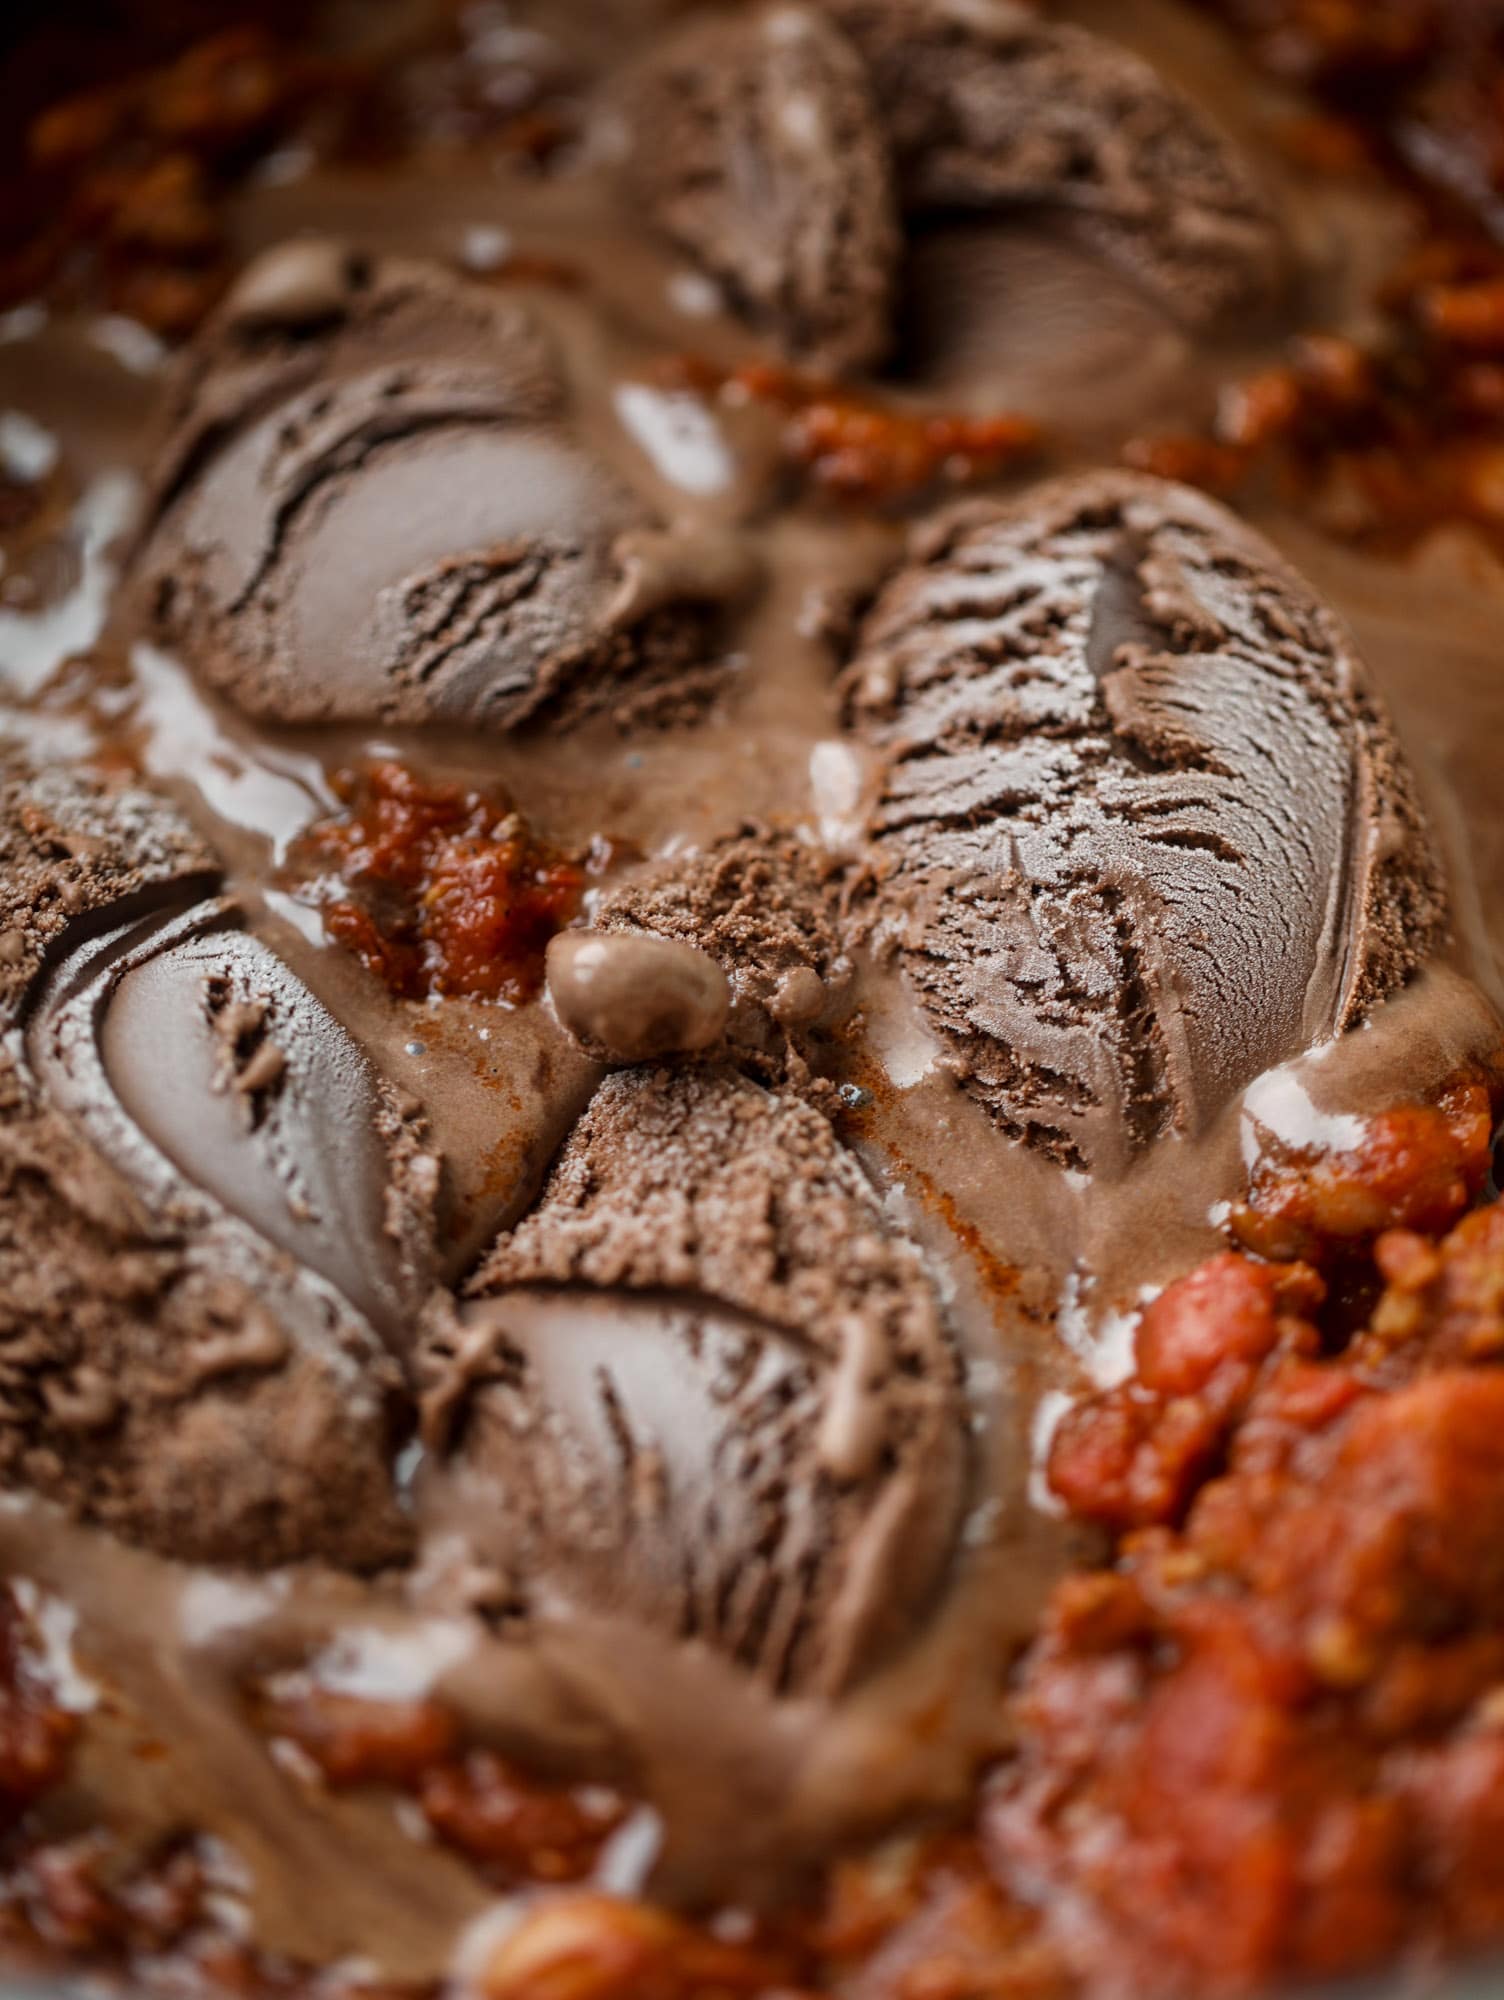 This fire and ice chili has a secret ingredient that makes it rich, velvety and insanely delicious. Dark chocolate ice cream is stirred in before serving and adds a crazy depth of flavor while bringing so much richness to your favorite bowl. You have to try it! I howsweeteats.com #chili #recipe #ice #cream #chili #bar